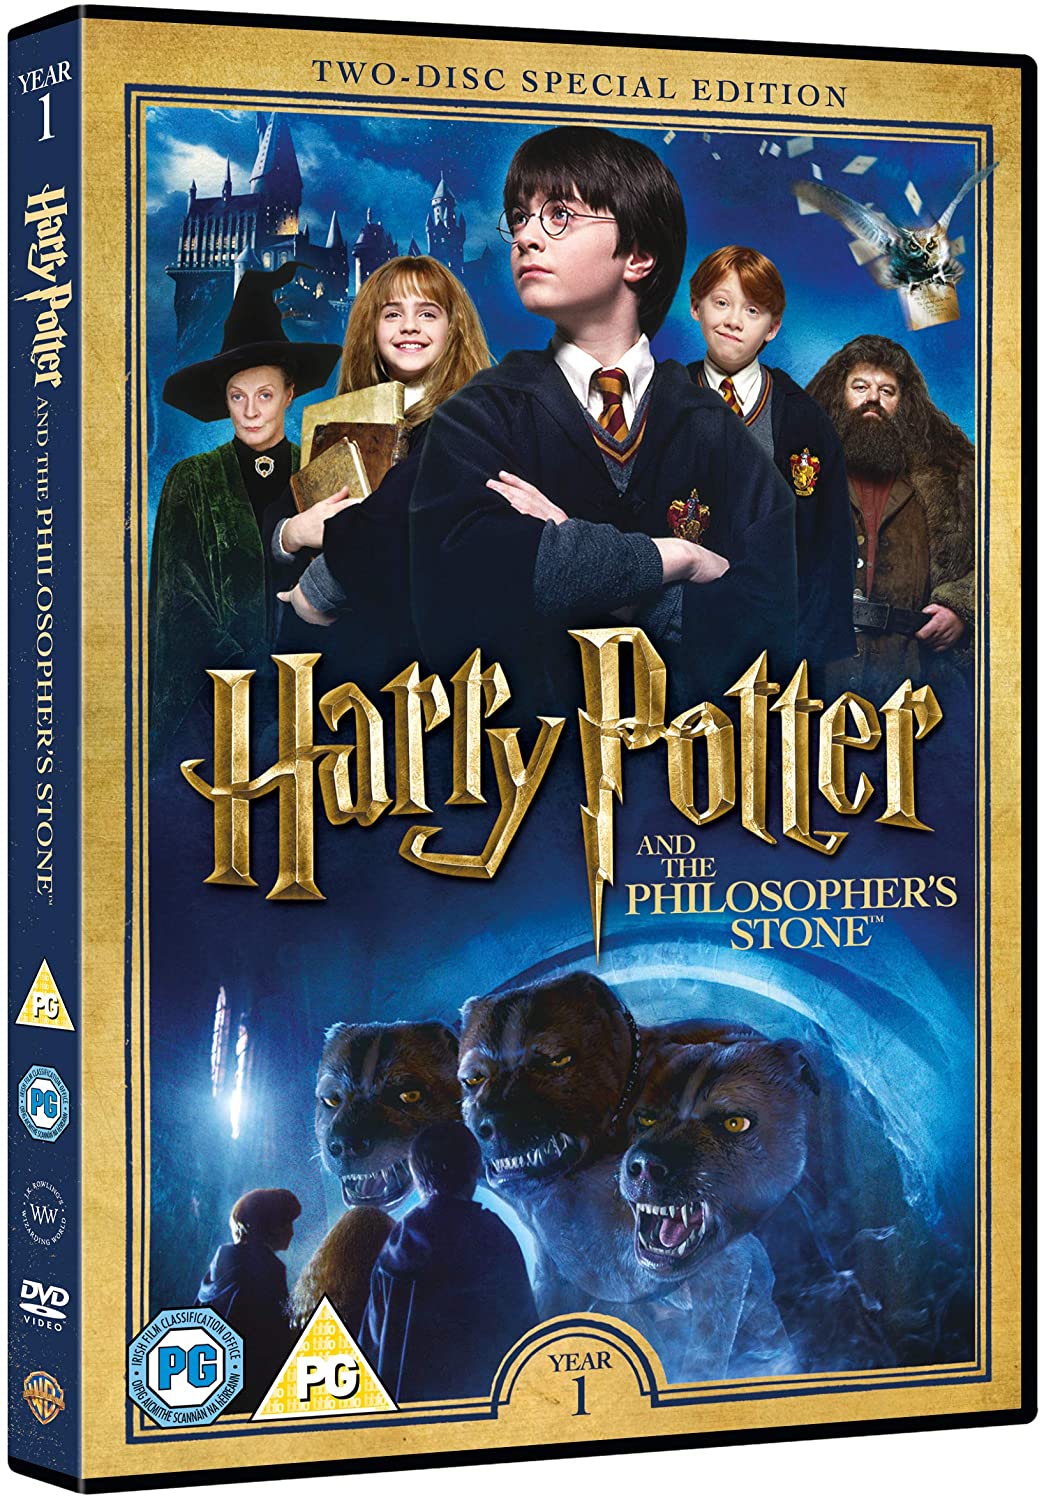 Harry Potter and the Philosopher's Stone [Year 1] [2016 Edition 2 Disk] [2001] - Fantasy/Family [DVD]